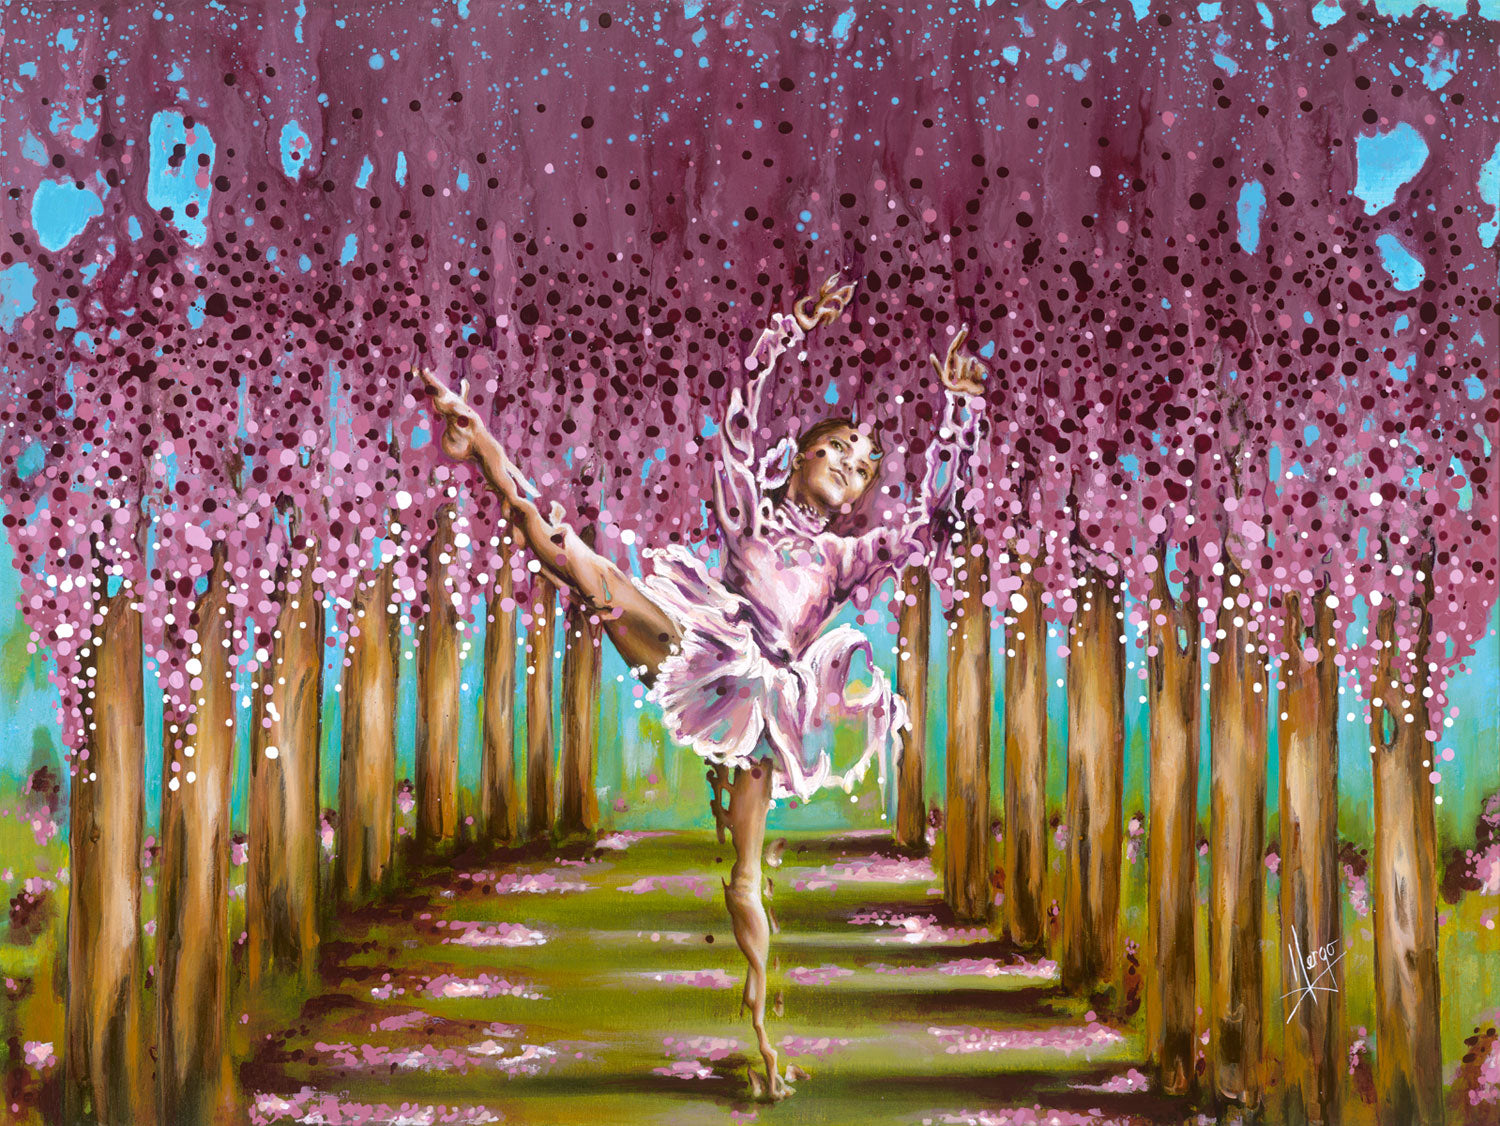 "Blossom" ballerina girl dancing in a colorful forest painting